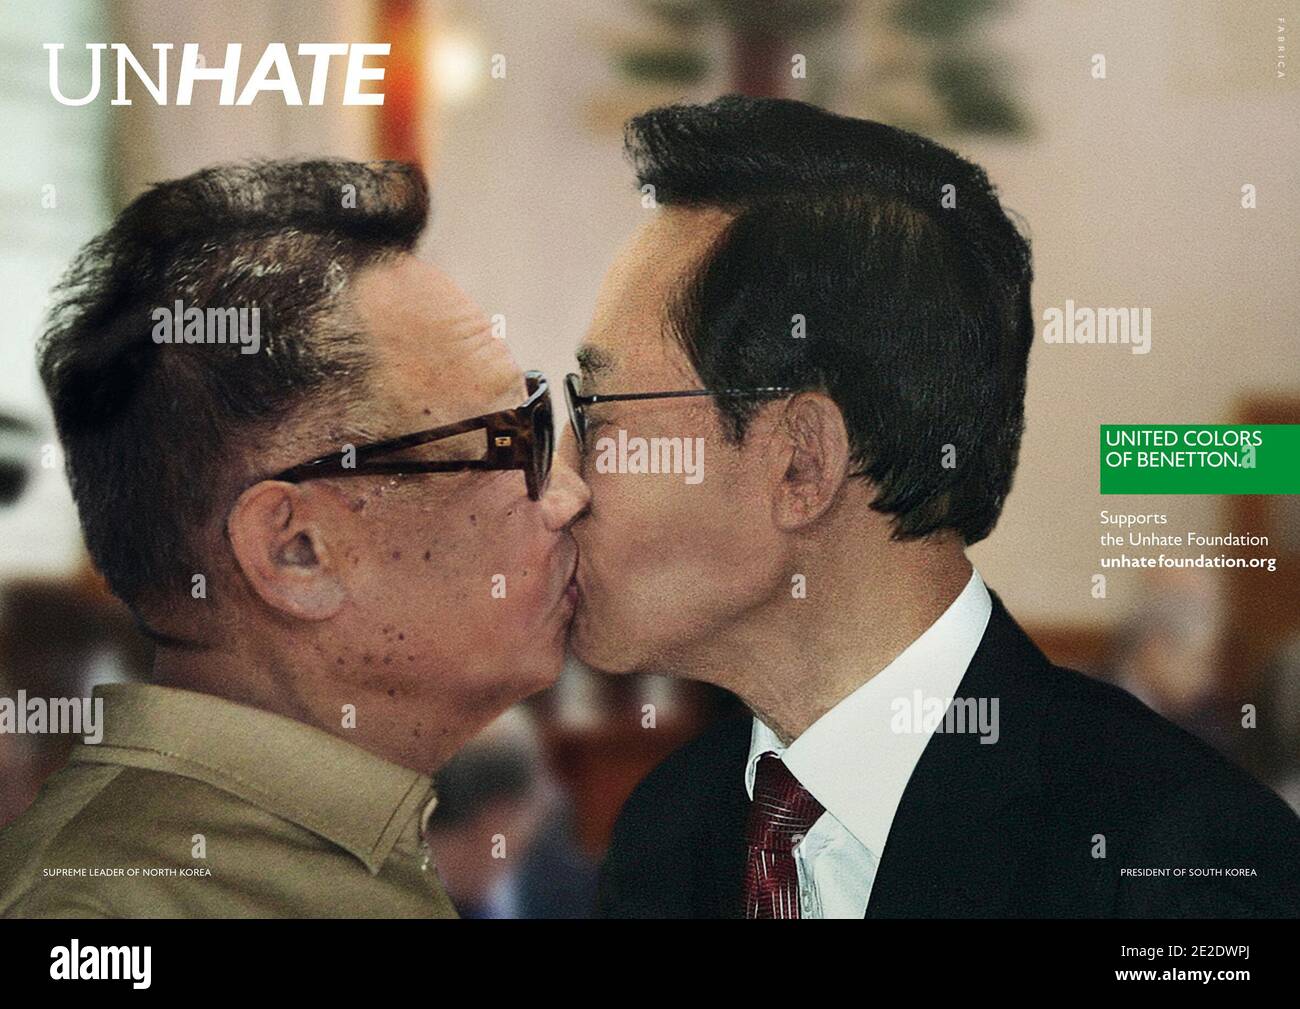 Images from United Colors of Benetton's Unhate campaign. The campaign  "invites the leaders of the world to combat the 'culture of hatred'. The  campiang includes mocked up images, one of which is